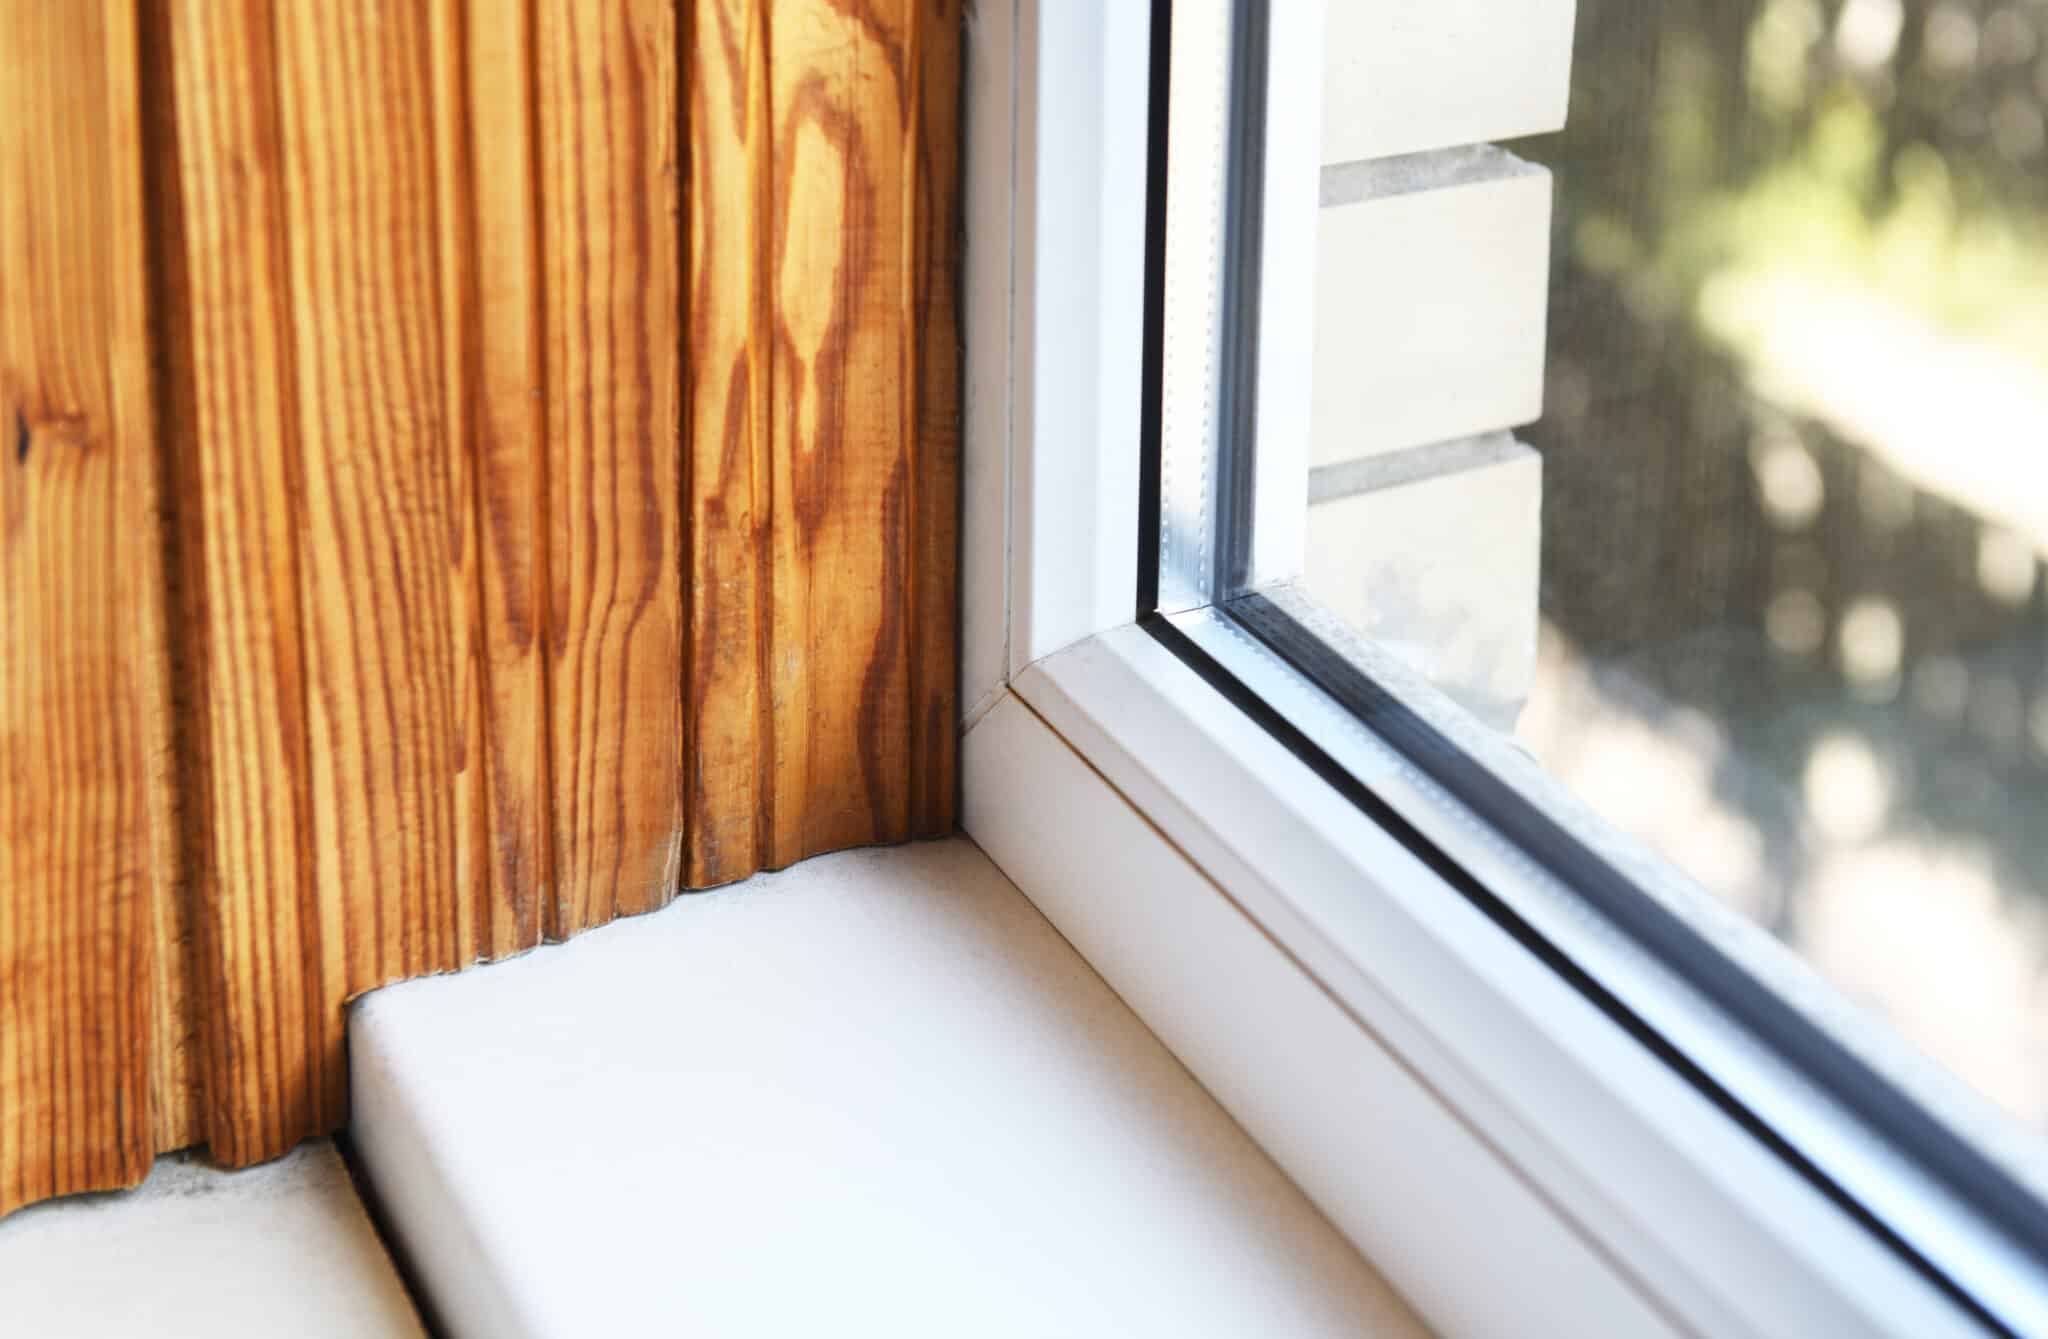 Double pane window replacement can improve your home’s resale value